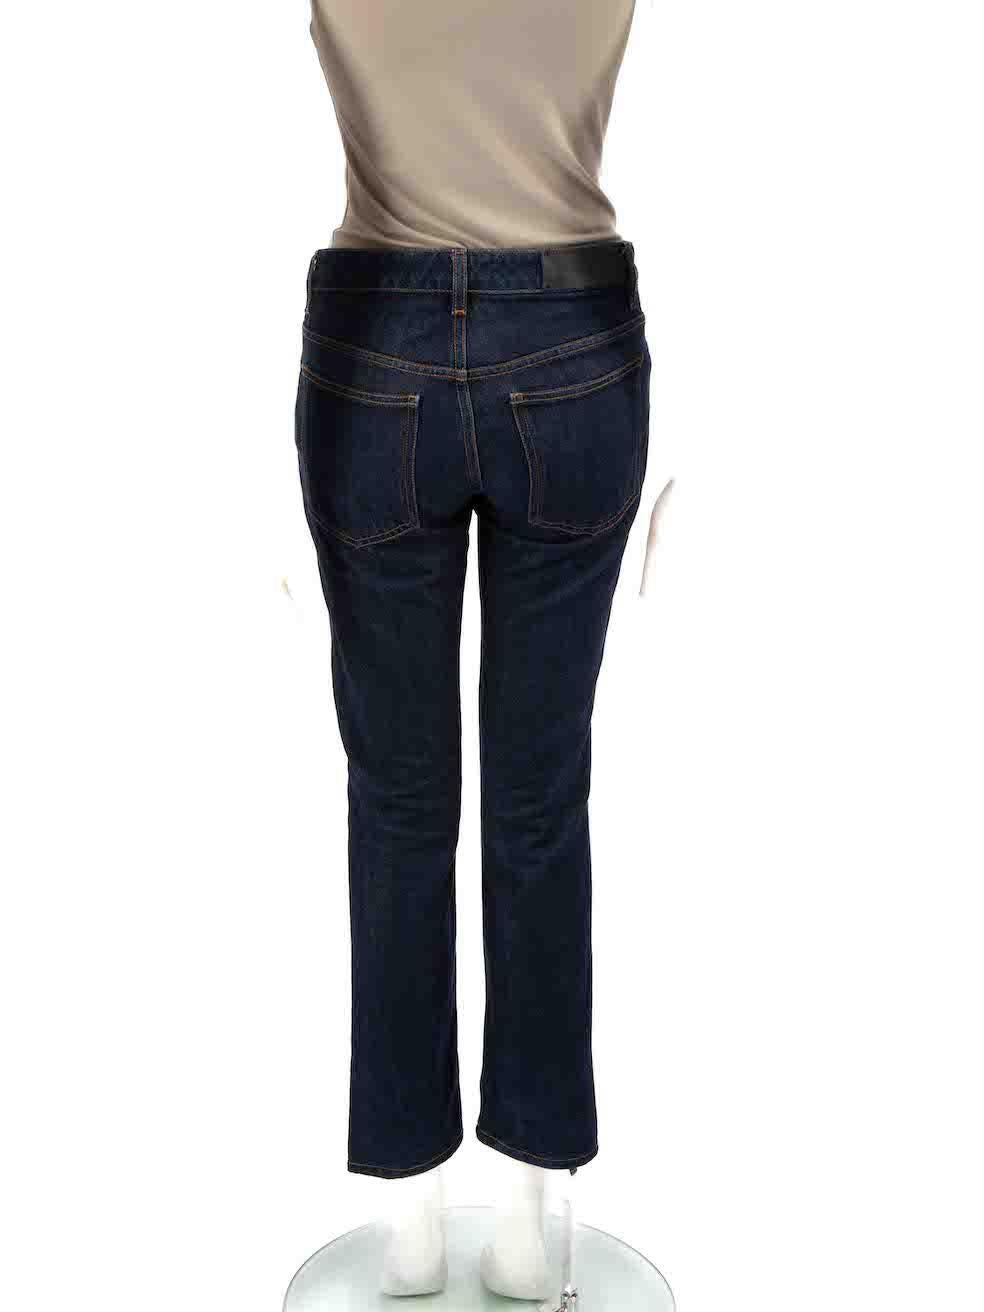 Victoria Beckham Blue Denim Low-Rise Slim Jeans Size S In Good Condition For Sale In London, GB